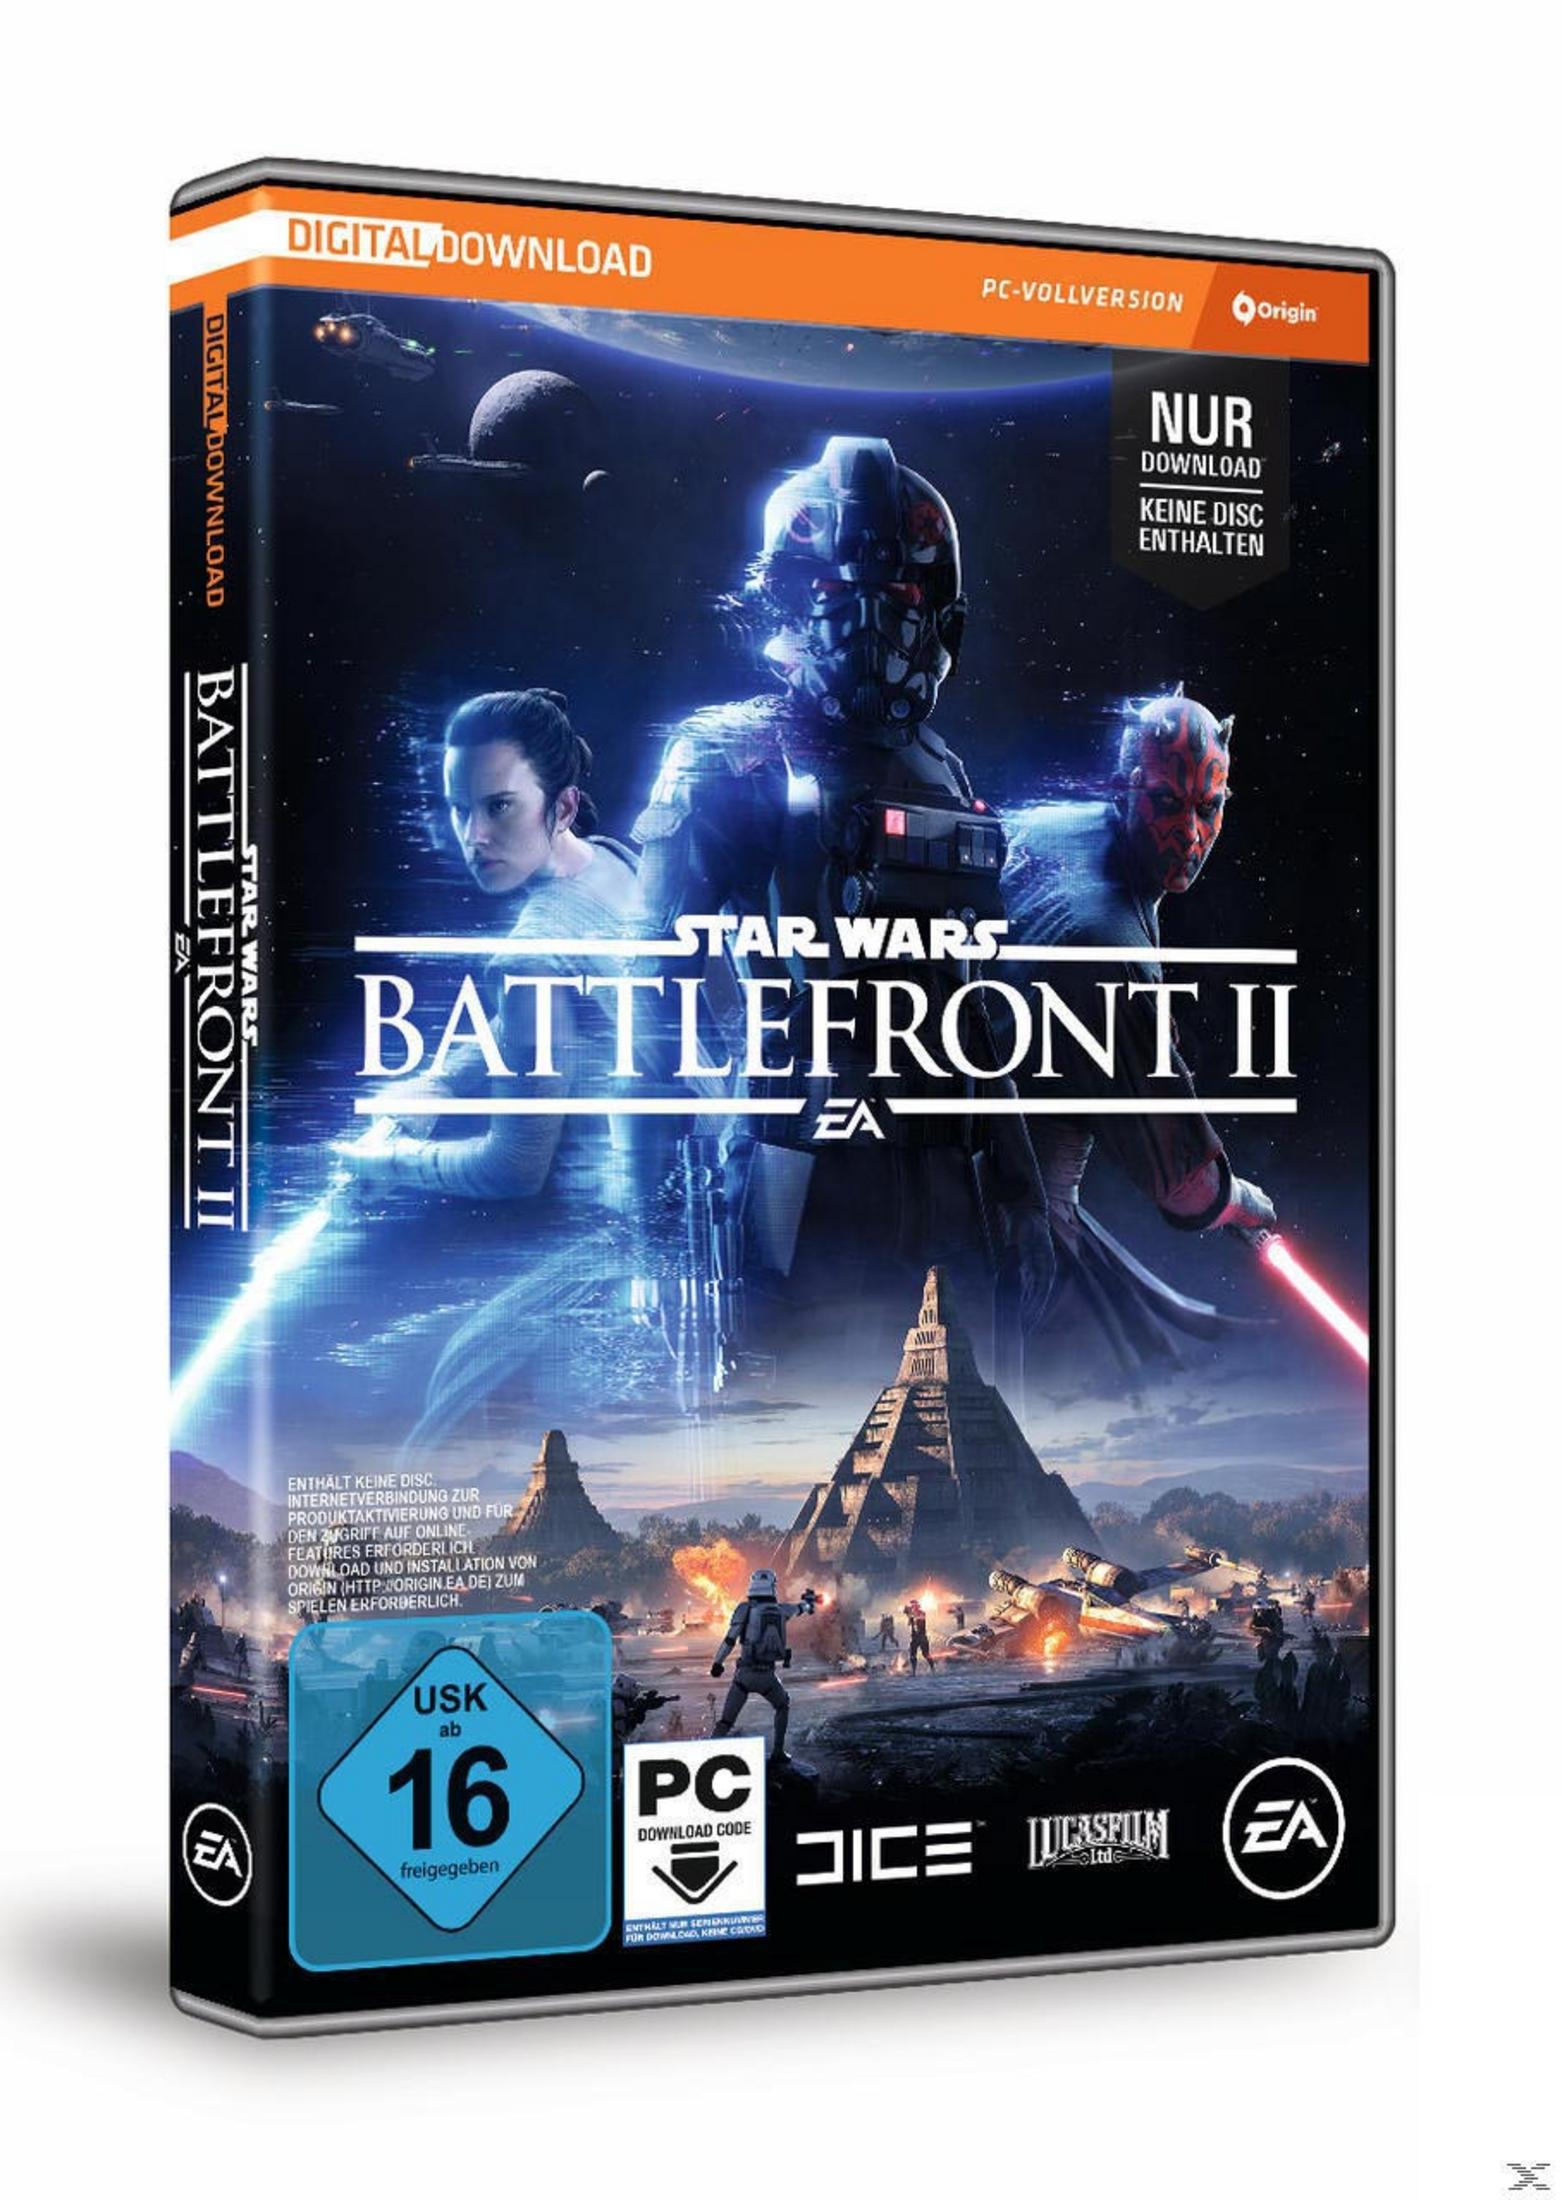 Wars Box) Battlefront - II (Code Star the in [PC]